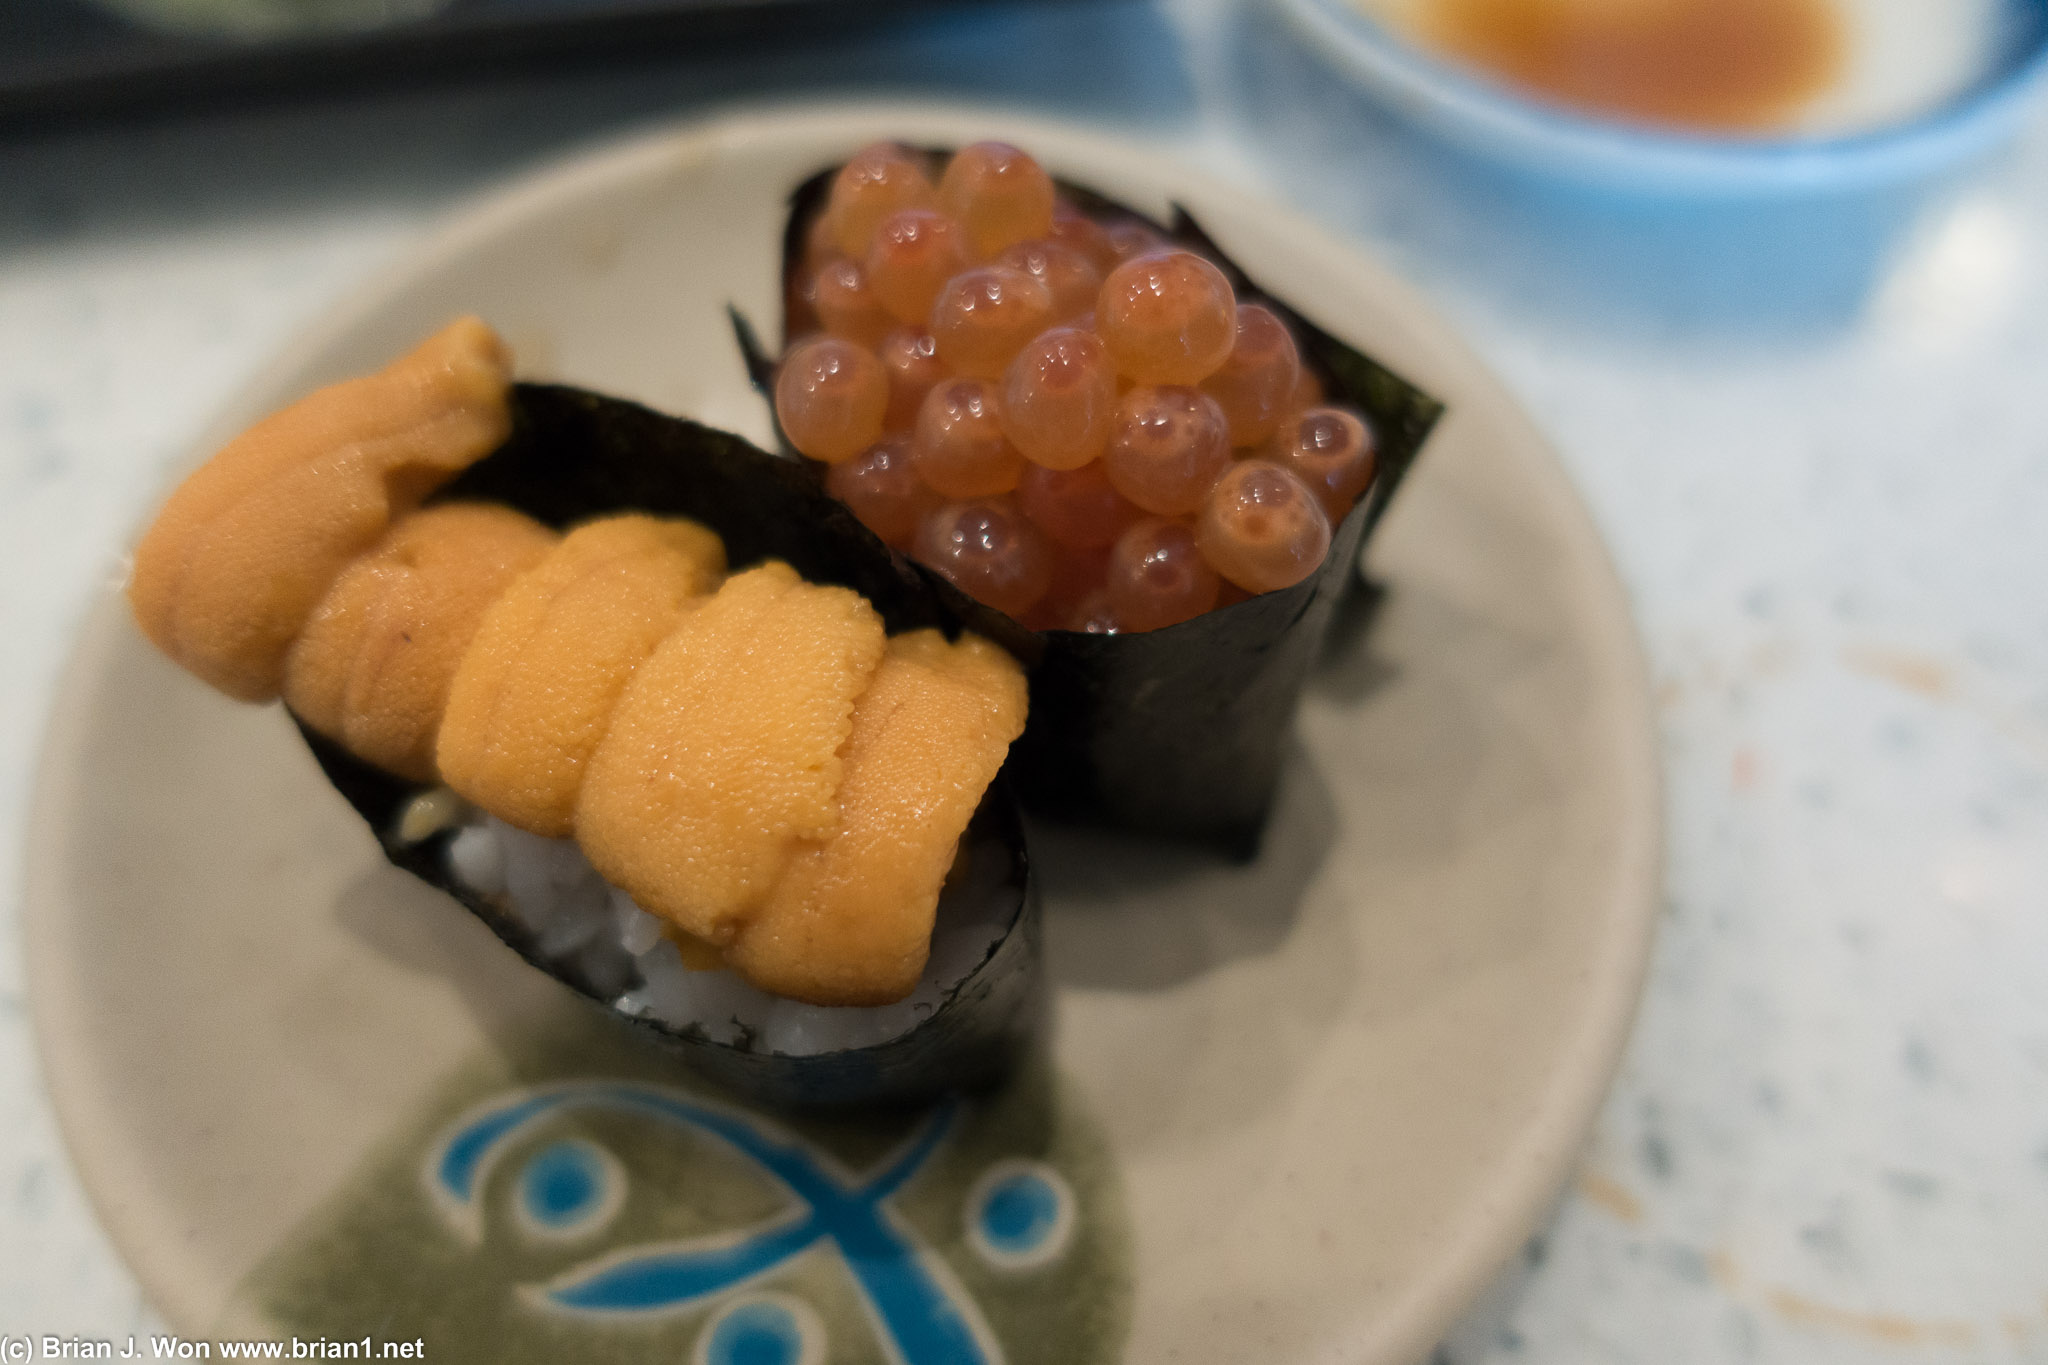 Hokkaido uni was ridiculously good. And the ikura was almost as good!